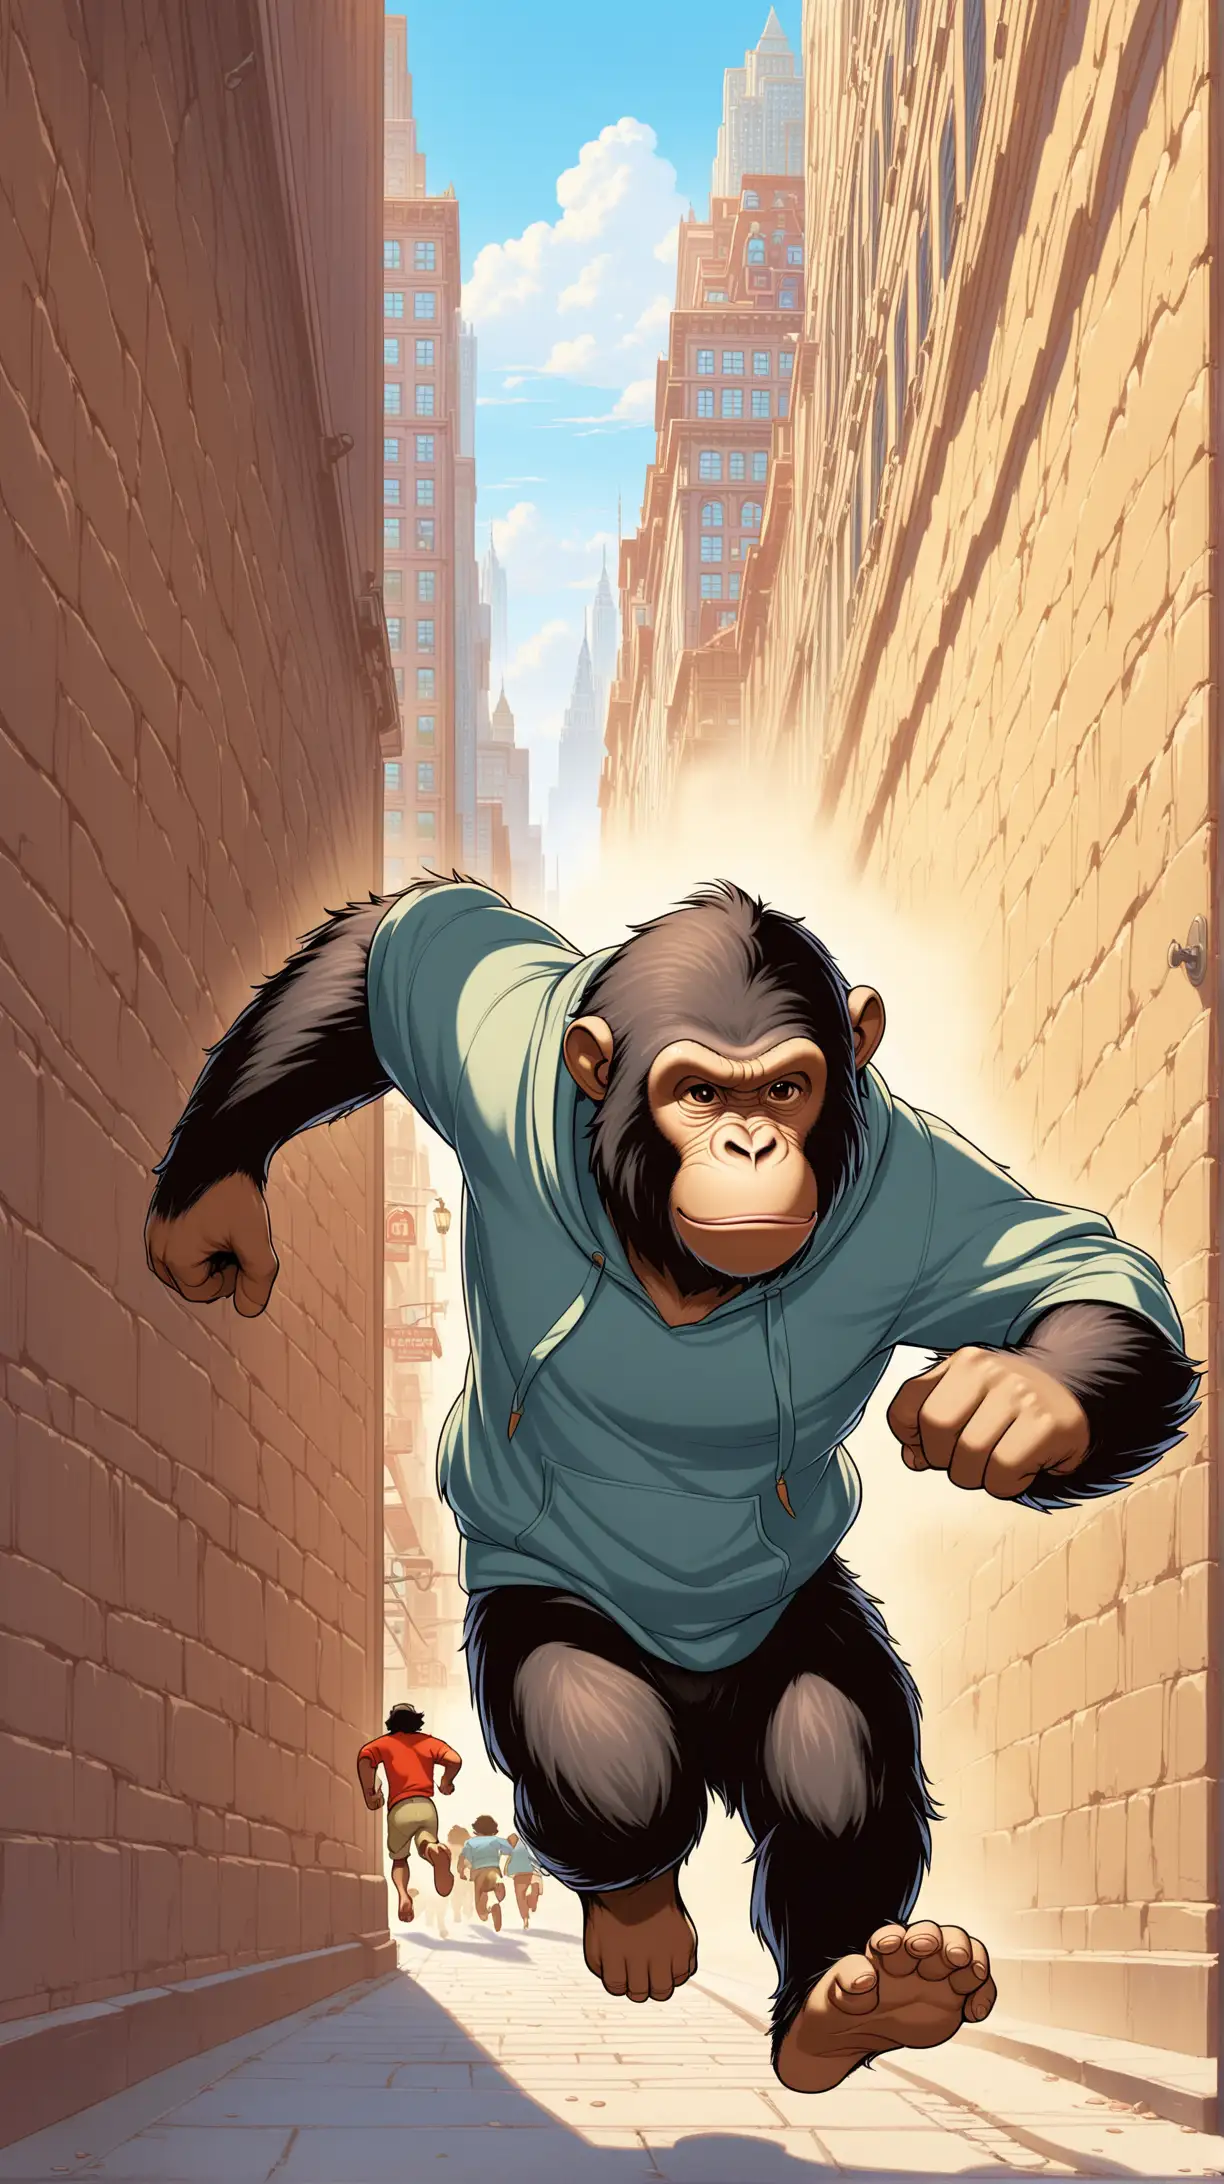 An Ape like jungle book of the famous disney movie. running on four feet. running away from police. Wearing an AMC Hoodie in front of the wall Street. Front Perspective! 
For most freedom for everybody!
education for peace!